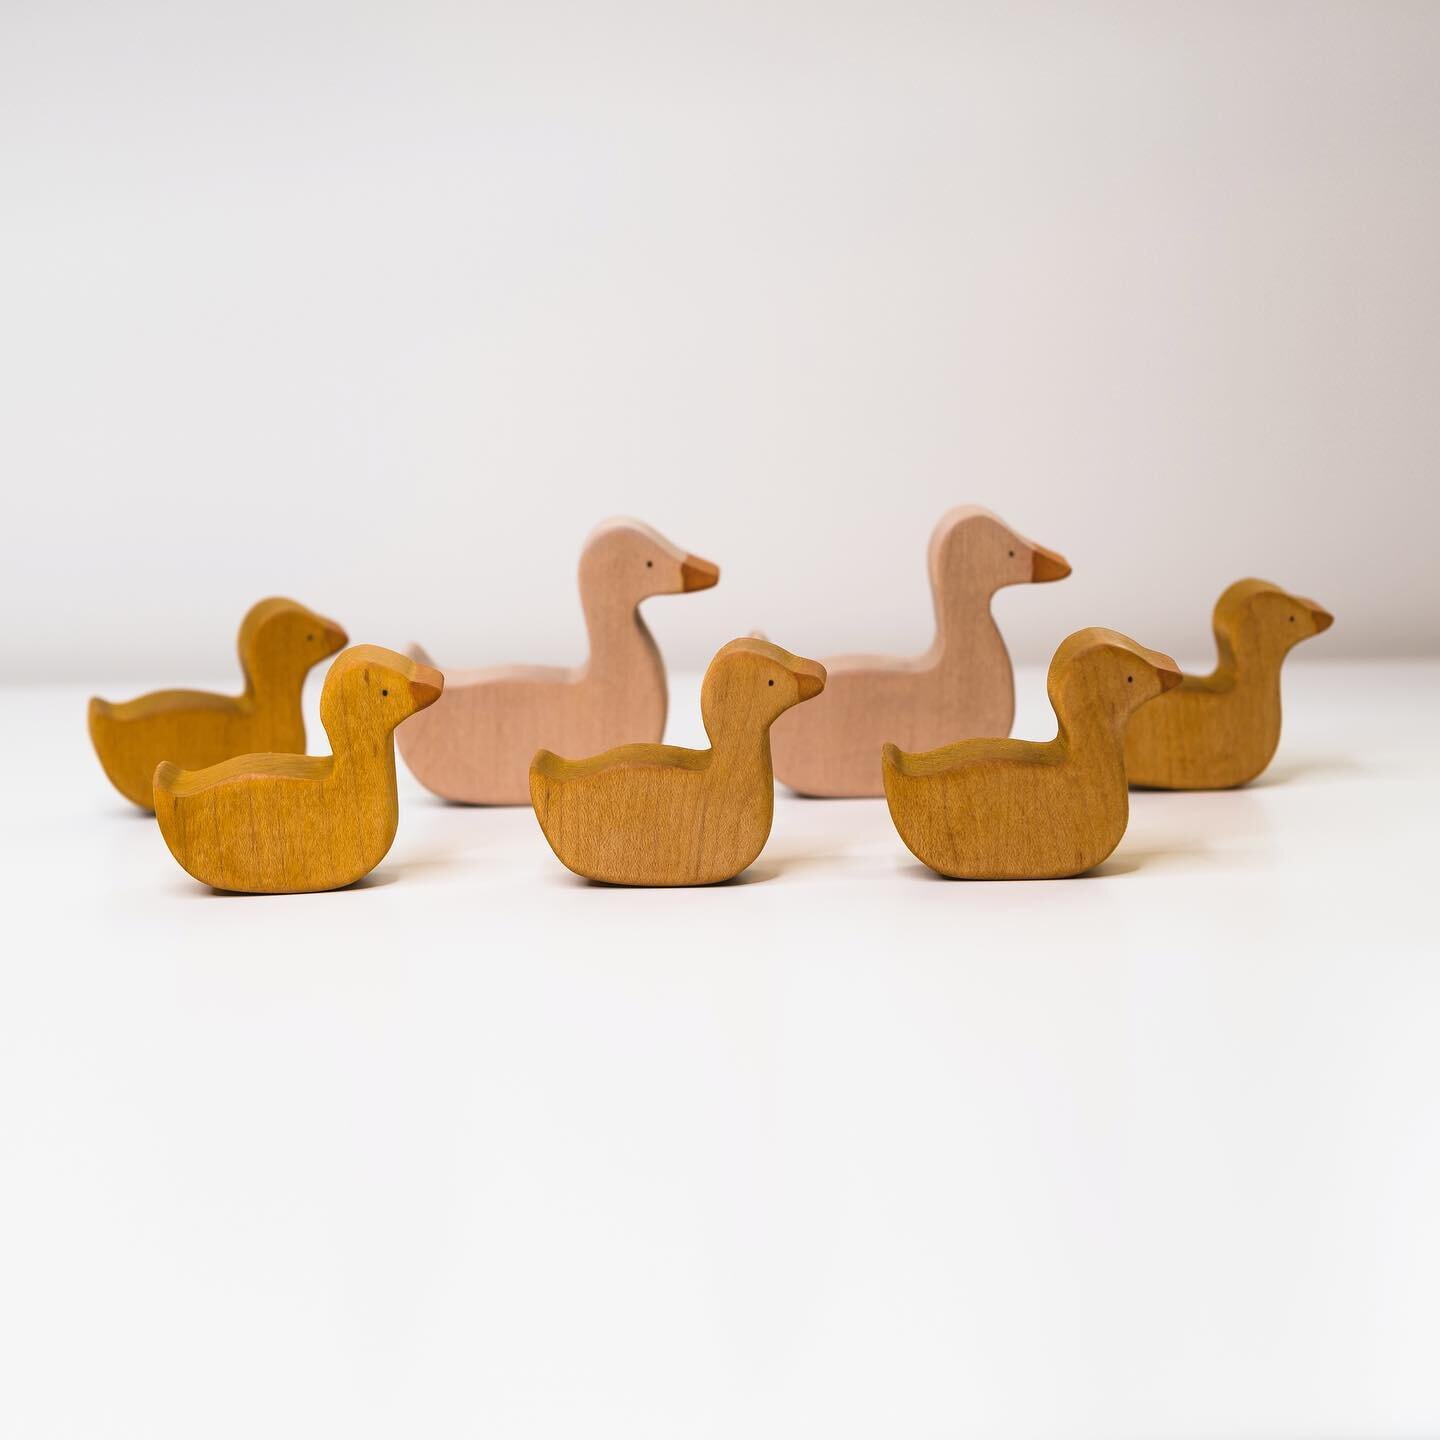 A maple hardwood set almost ready for their new home. If you would like a duck family of your own please put your email down on the website. These sets have been selling before they get listed. 

#vancouvermoms #woodentoys #woodentoyscanada #naturalt